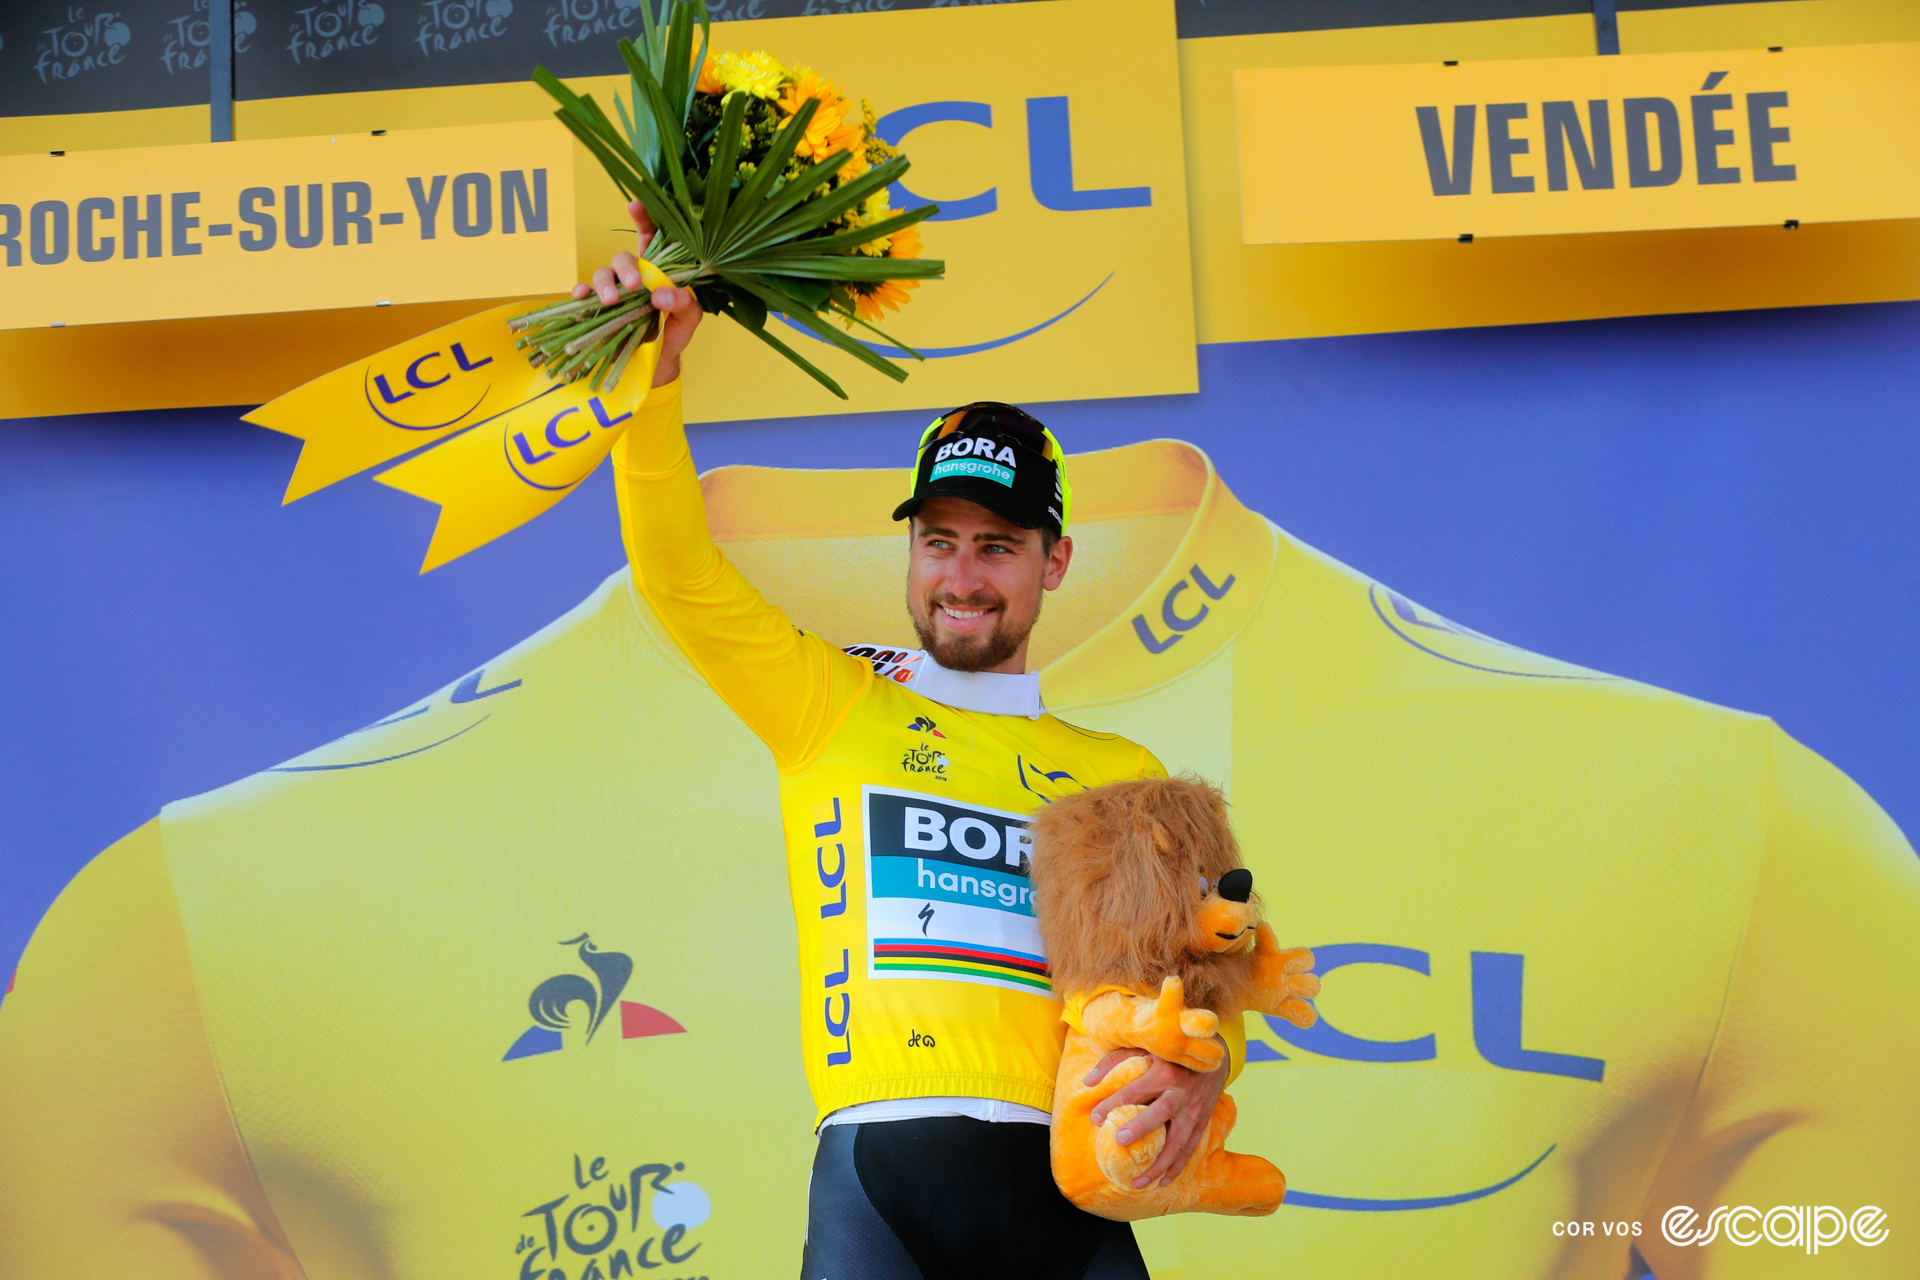 Peter Sagan stands on the podium after a Tour de France stage, wearing the leader's yellow jersey, holding a bouquet of flowers above his head, and holding a yellow line to his chest with his left hand.